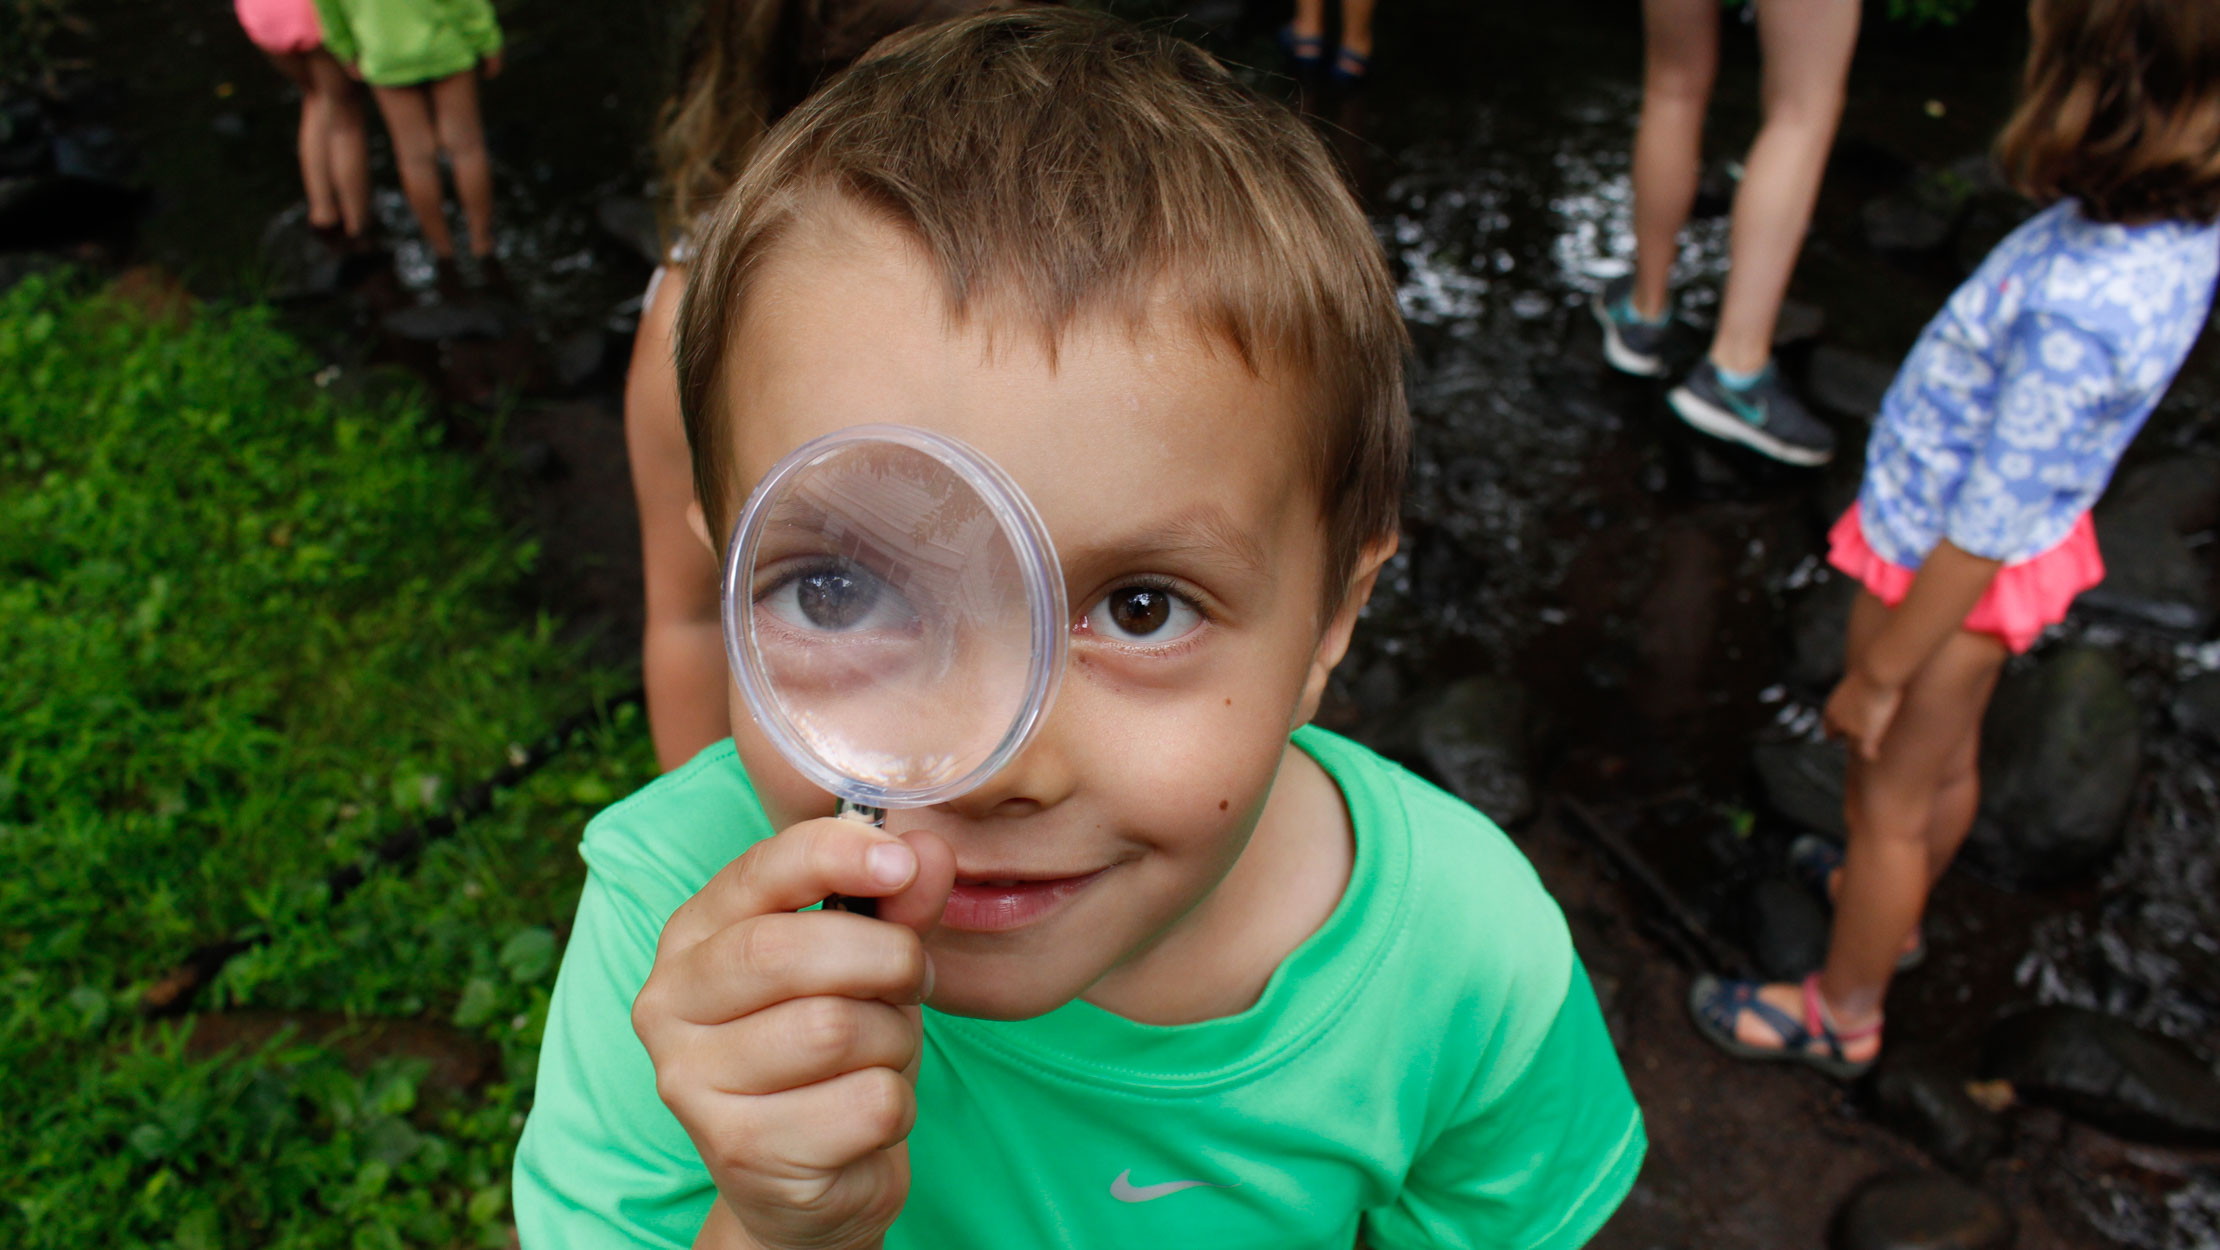 Young camper looking through a magnifying glass